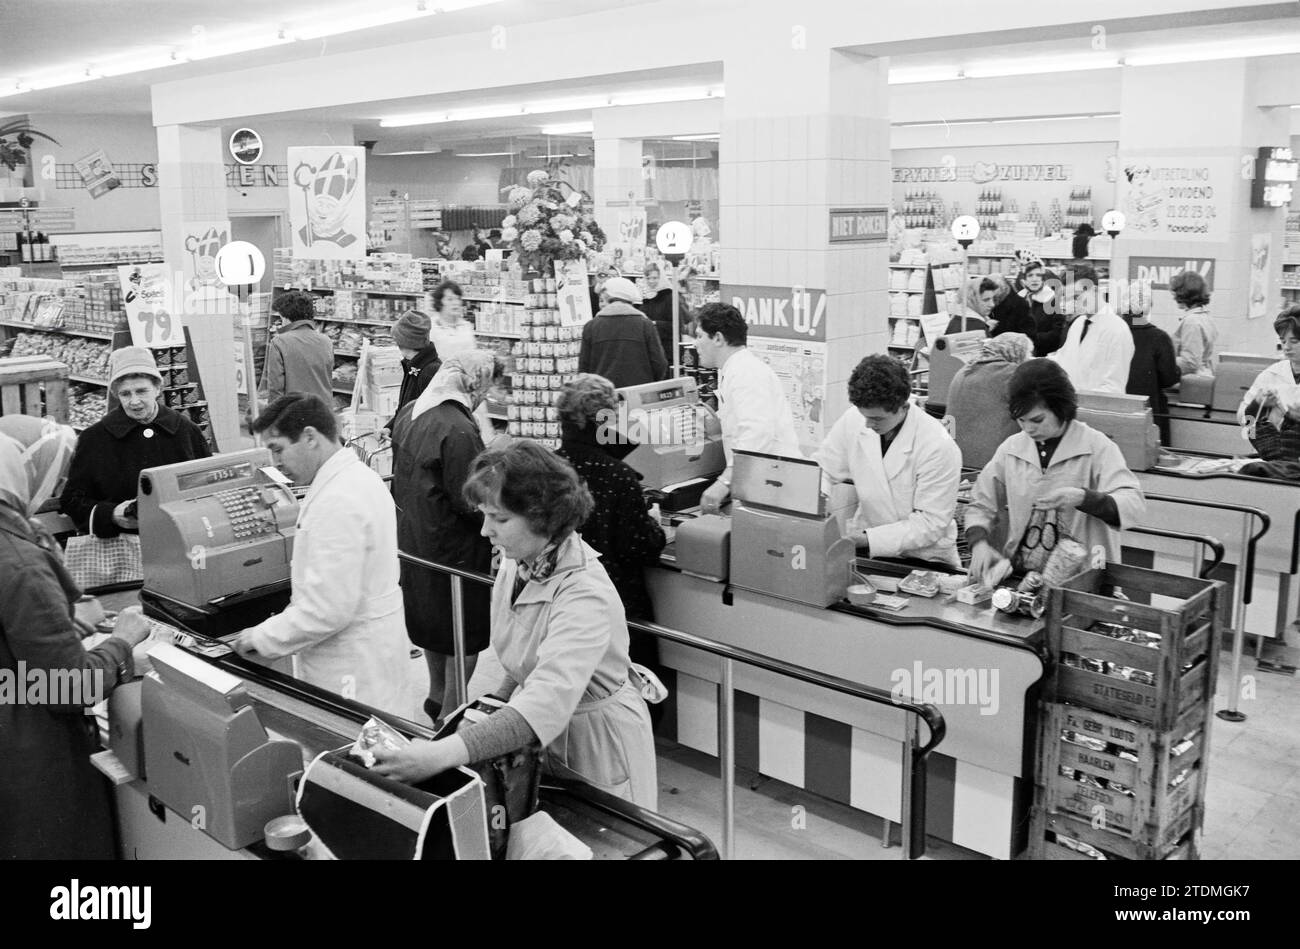 Co-op in IJmuiden, Shops and kiosks, 16-11-1962, Whizgle News from the Past, Tailored for the Future. Explore historical narratives, Dutch The Netherlands agency image with a modern perspective, bridging the gap between yesterday's events and tomorrow's insights. A timeless journey shaping the stories that shape our future Stock Photo